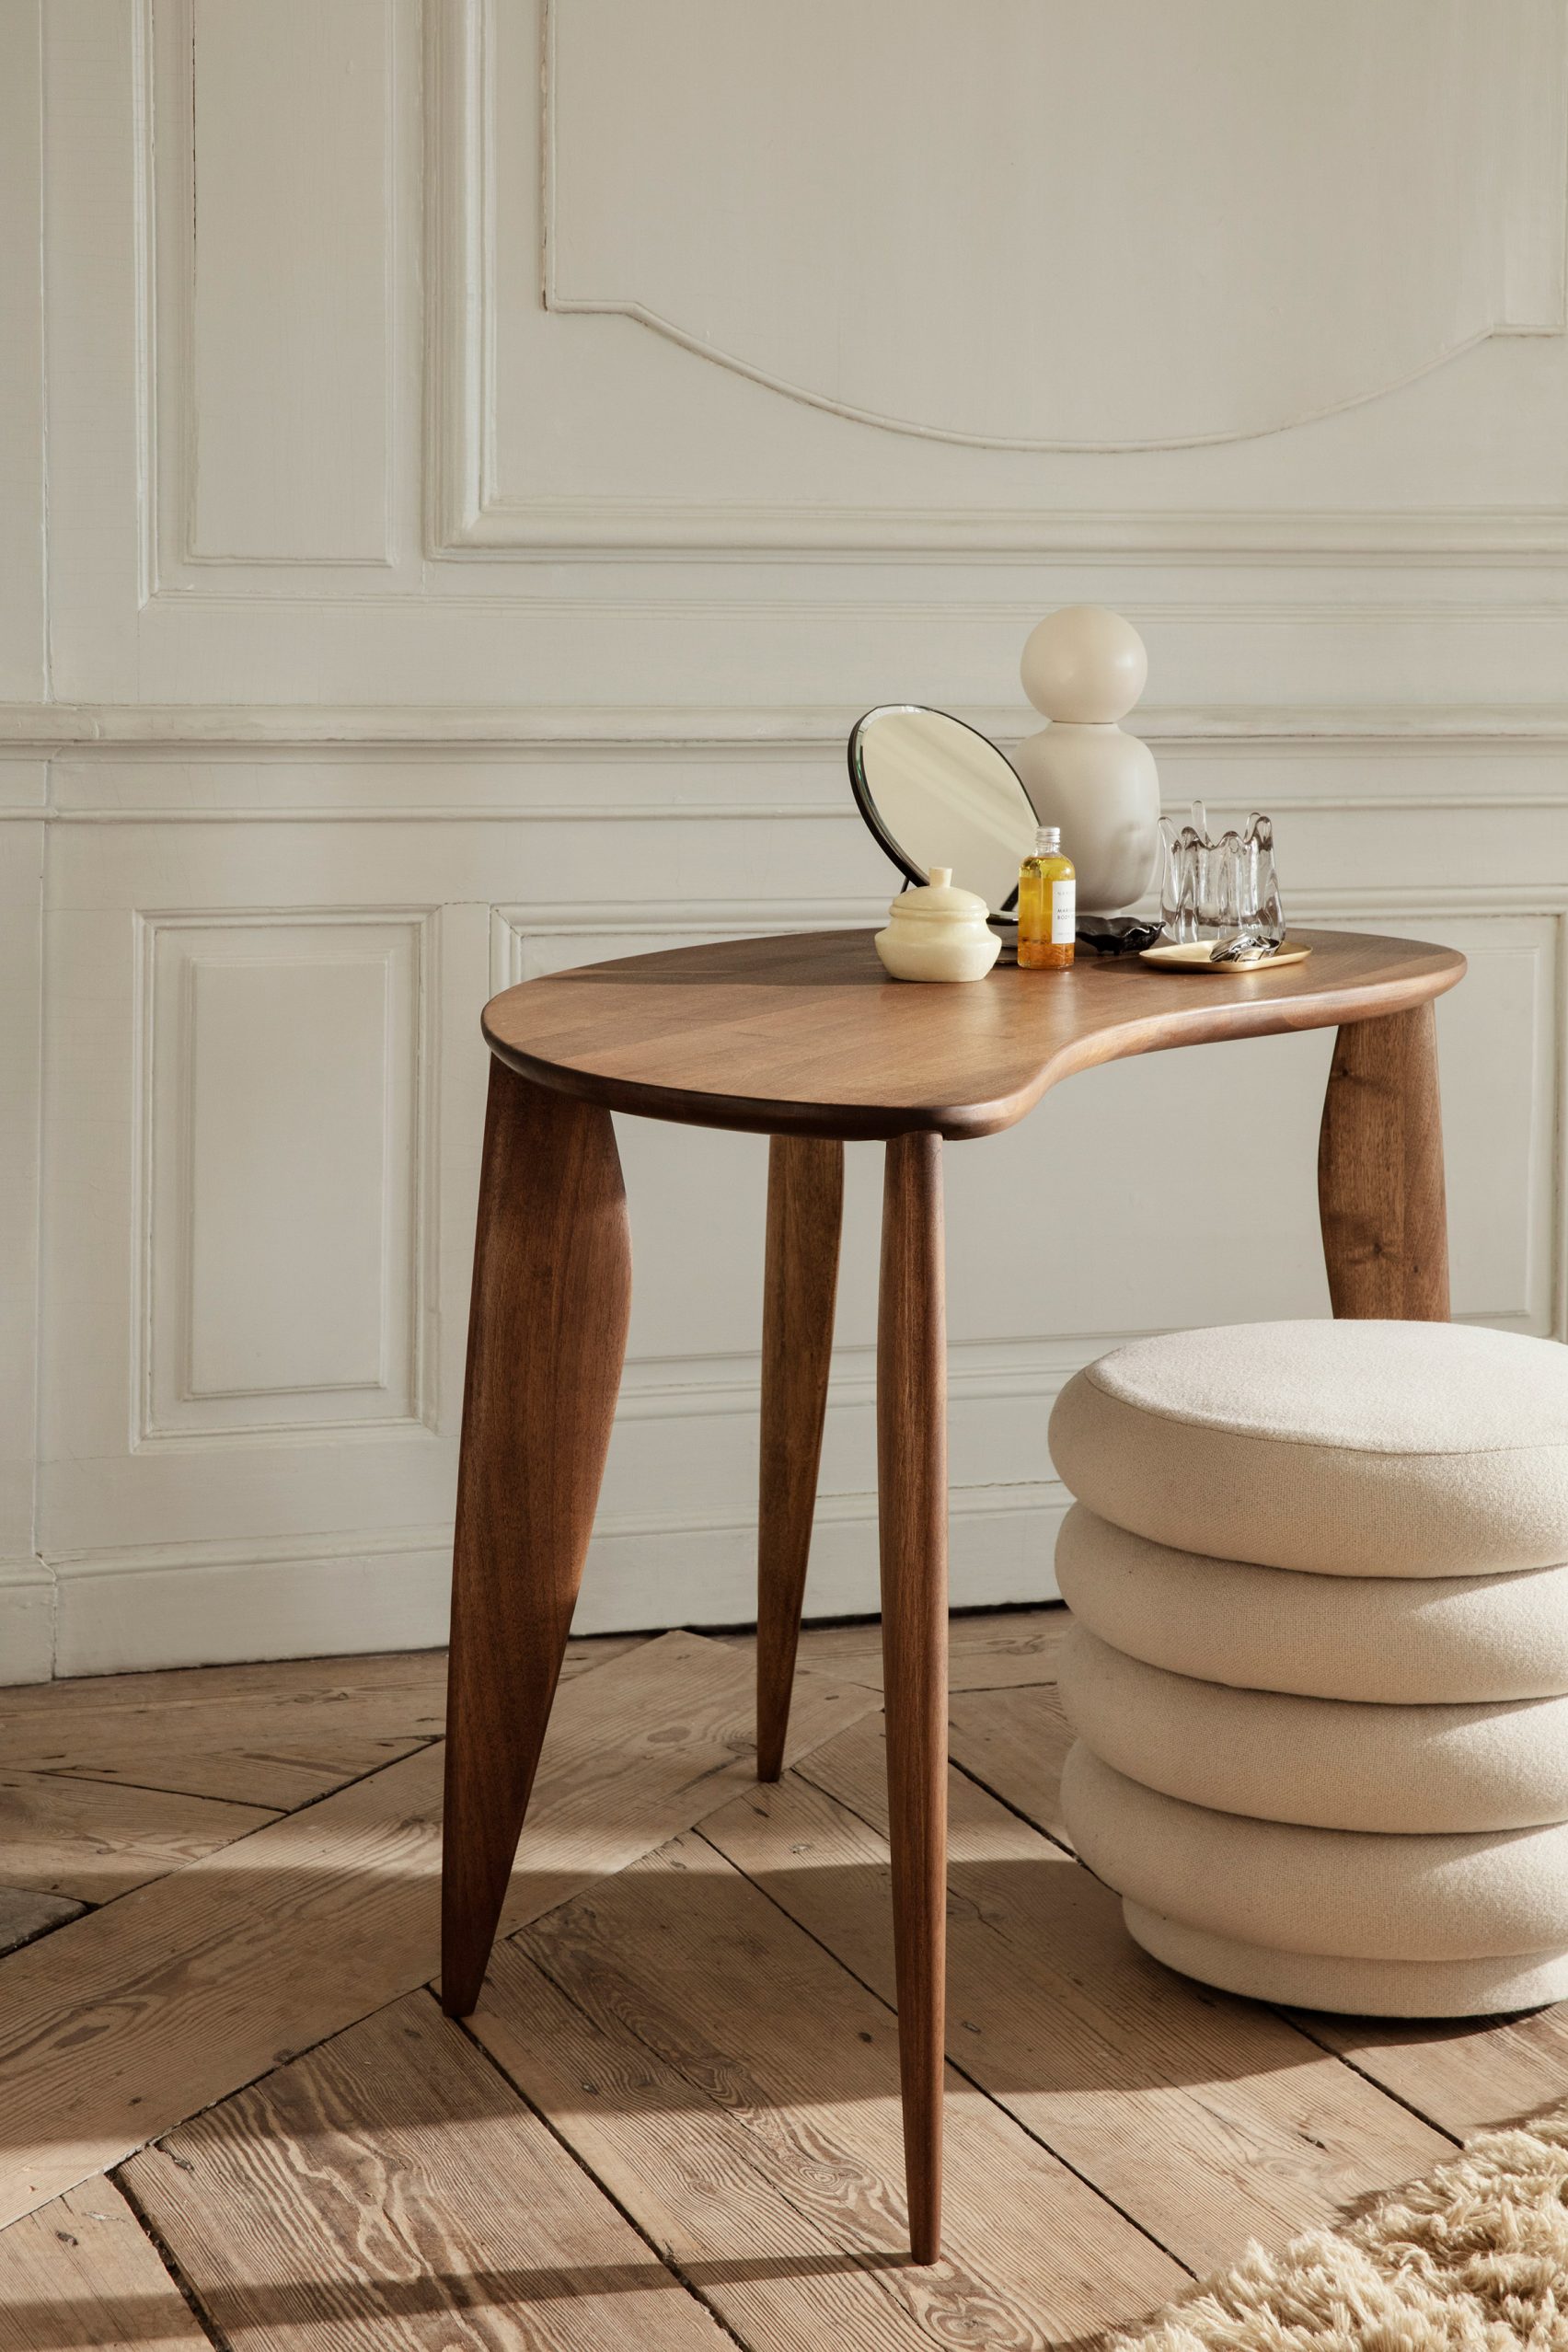 The walnut Feve Desk which was presented at Maison & Objet